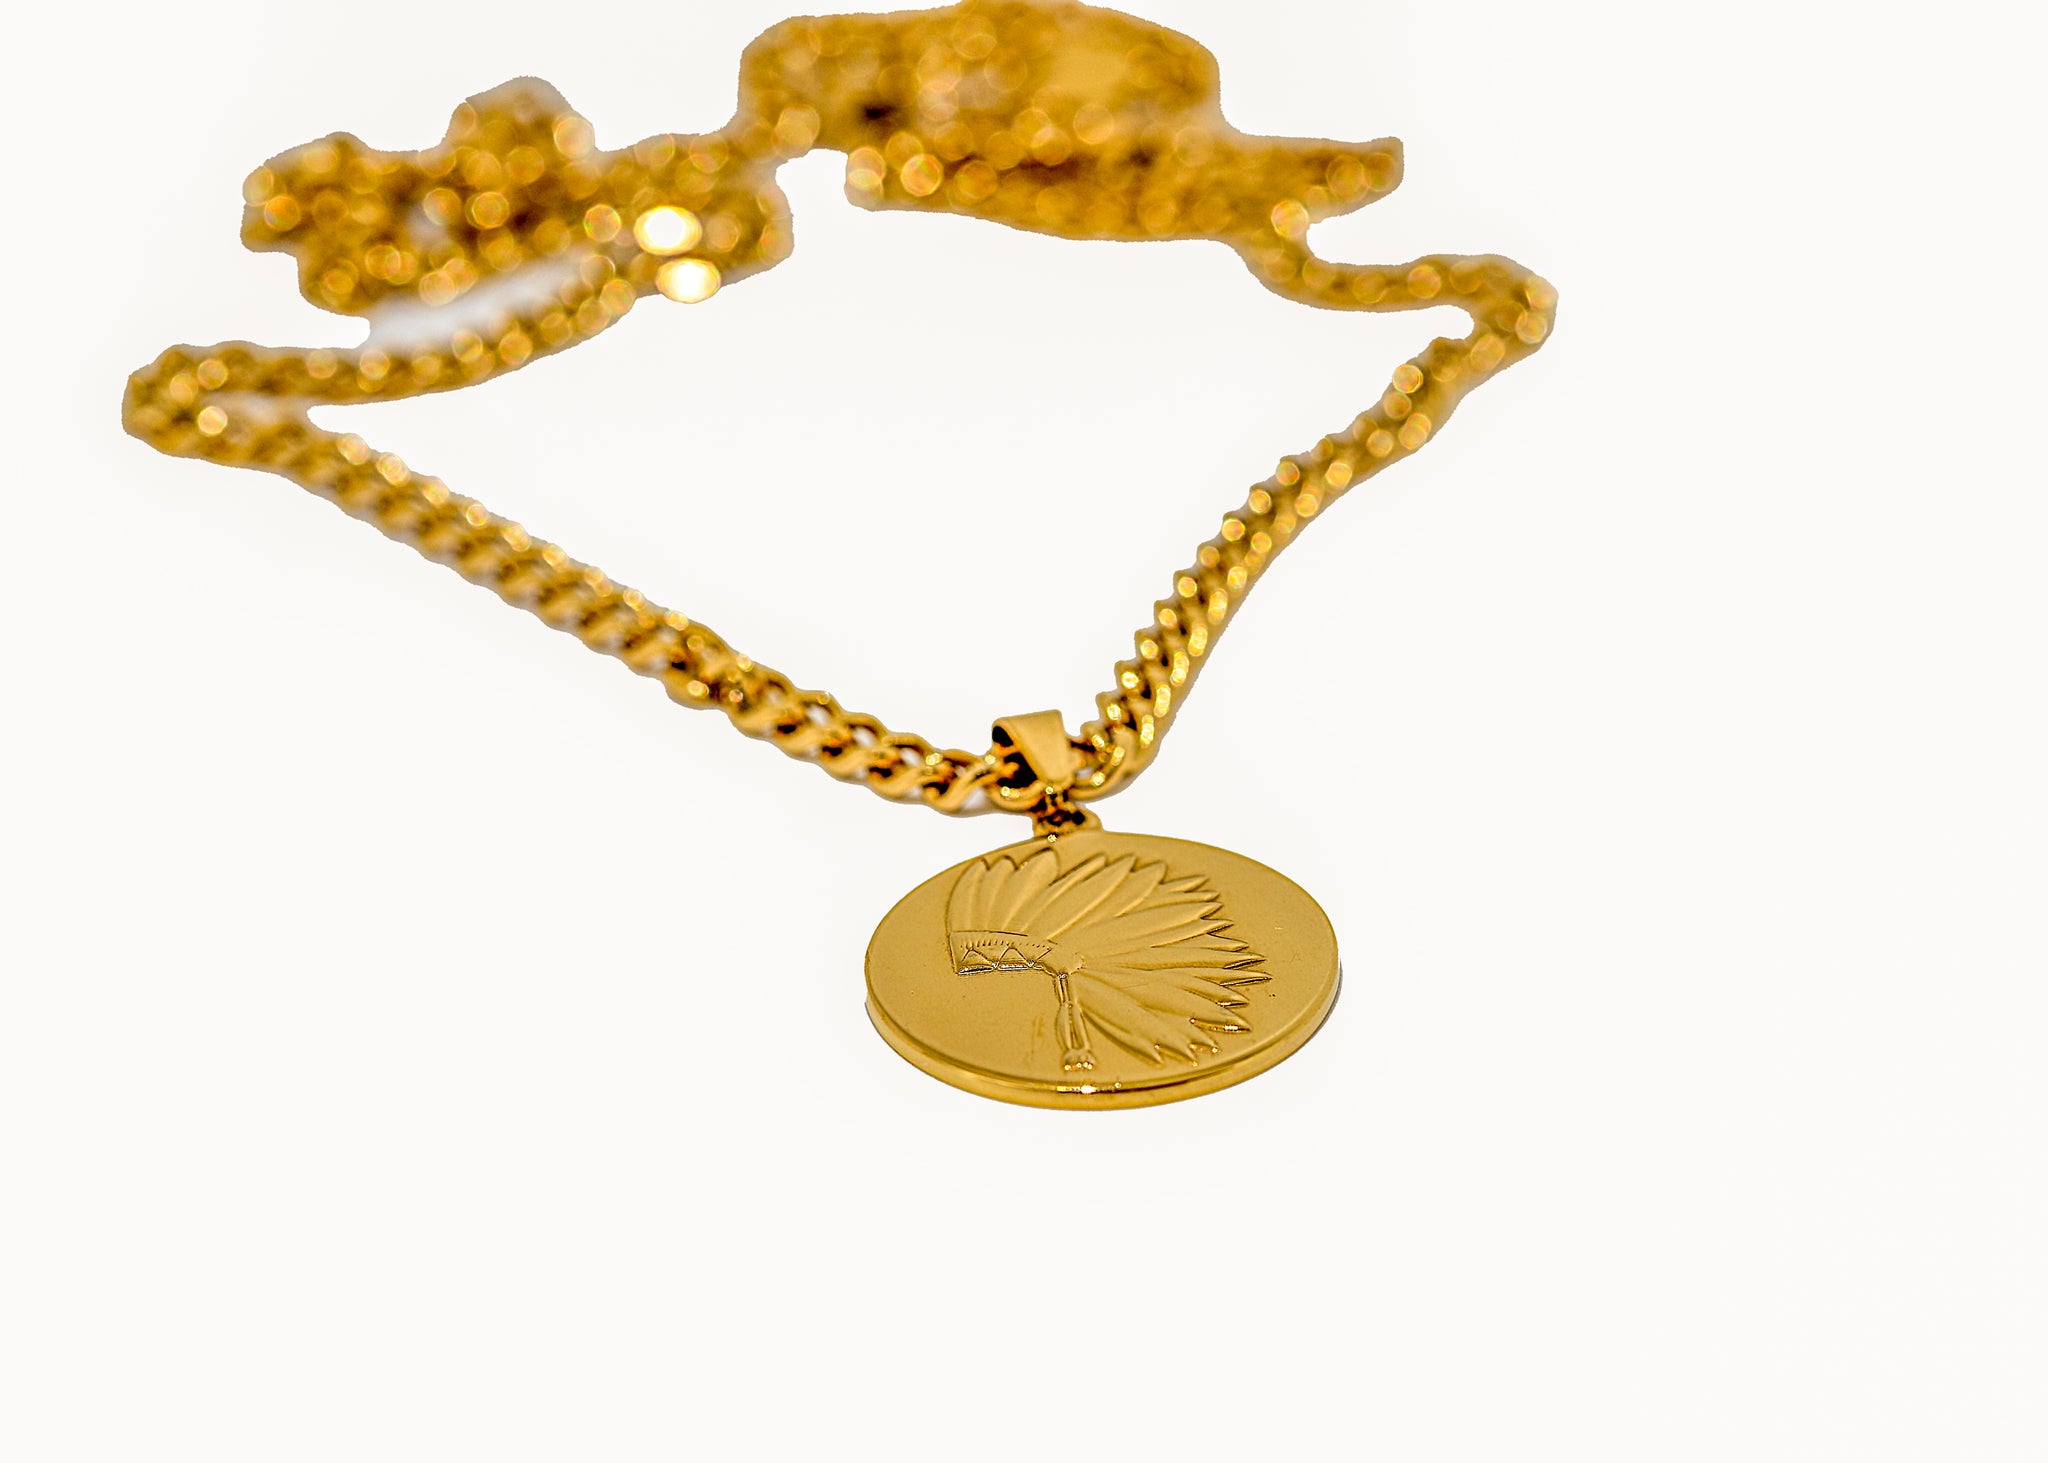 Gold chief necklace close-up showing chain